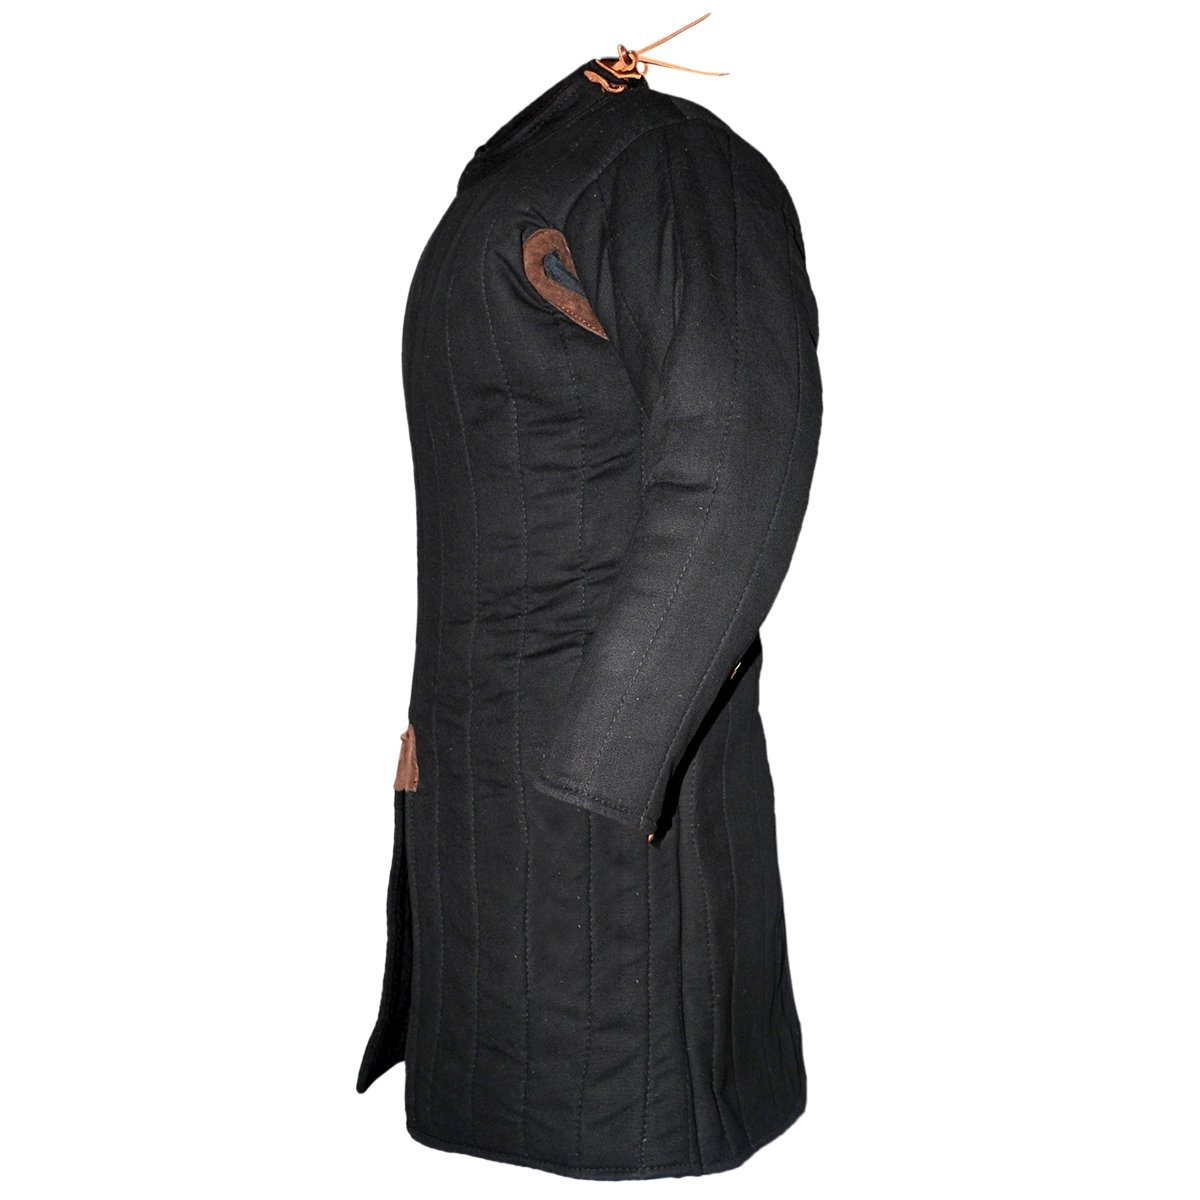 Closed Gambeson Late 12th C./Early 13th C., Black Size L